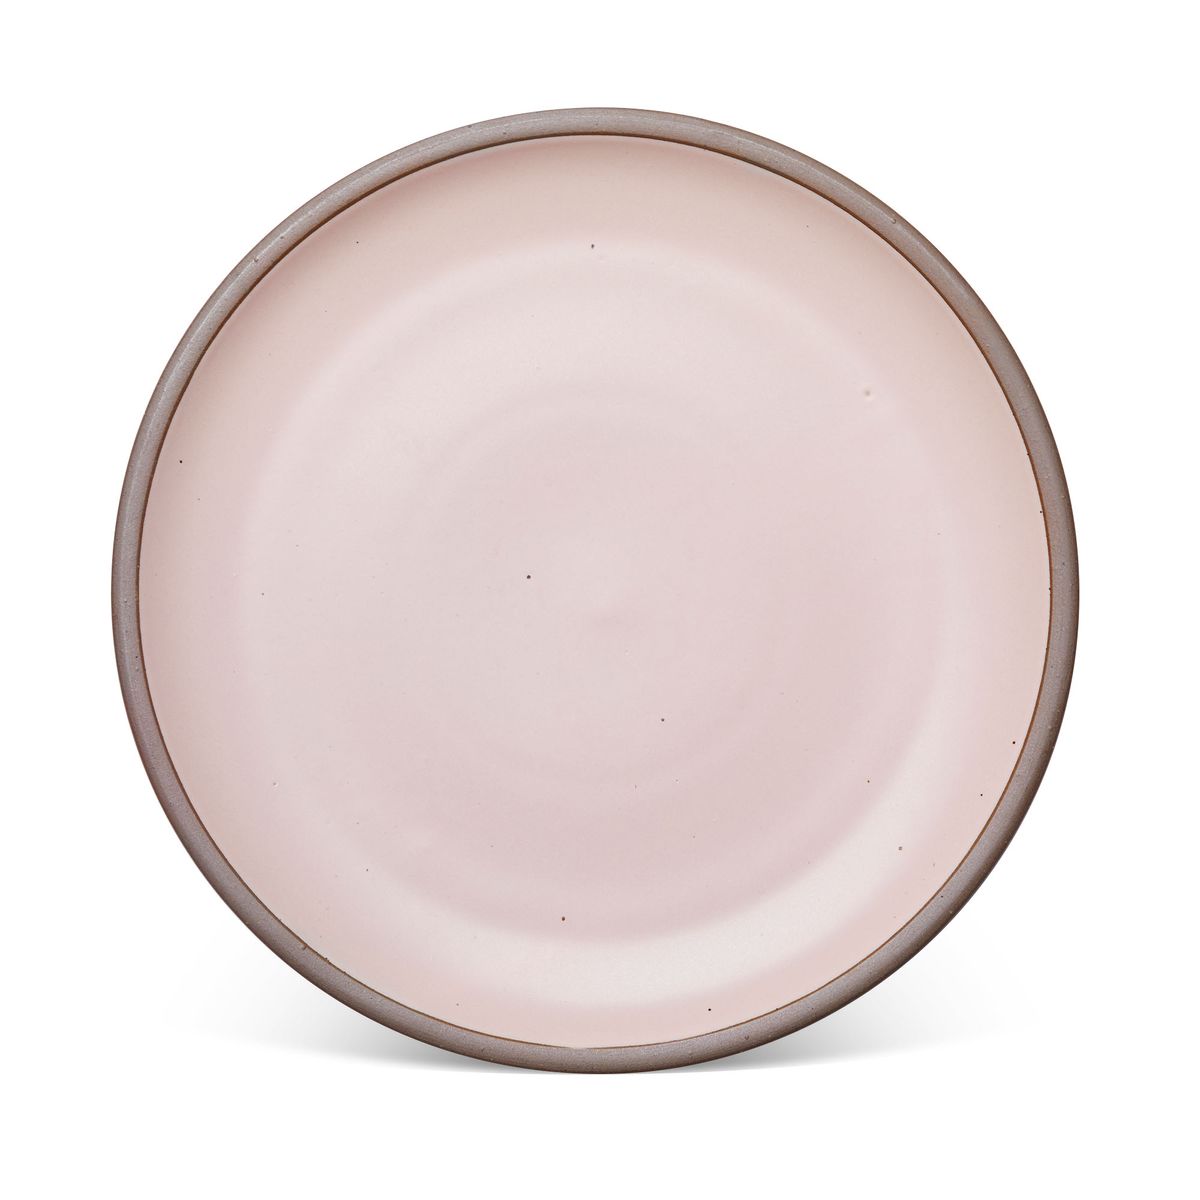 A large ceramic platter in a soft light pink color featuring iron speckles and an unglazed rim